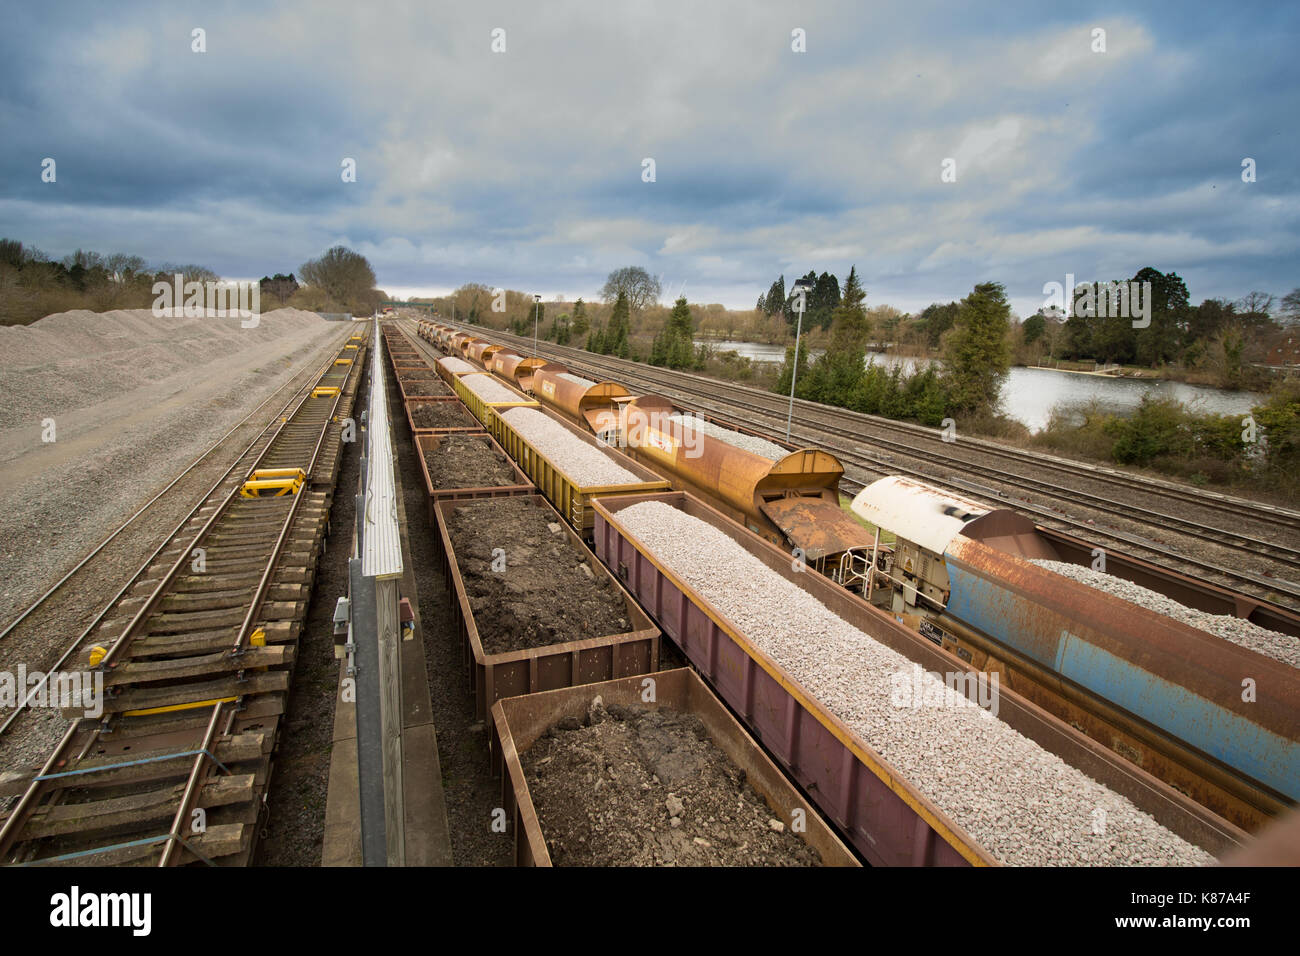 Rail sidings with stationary carriages and dramatic sky Stock Photo